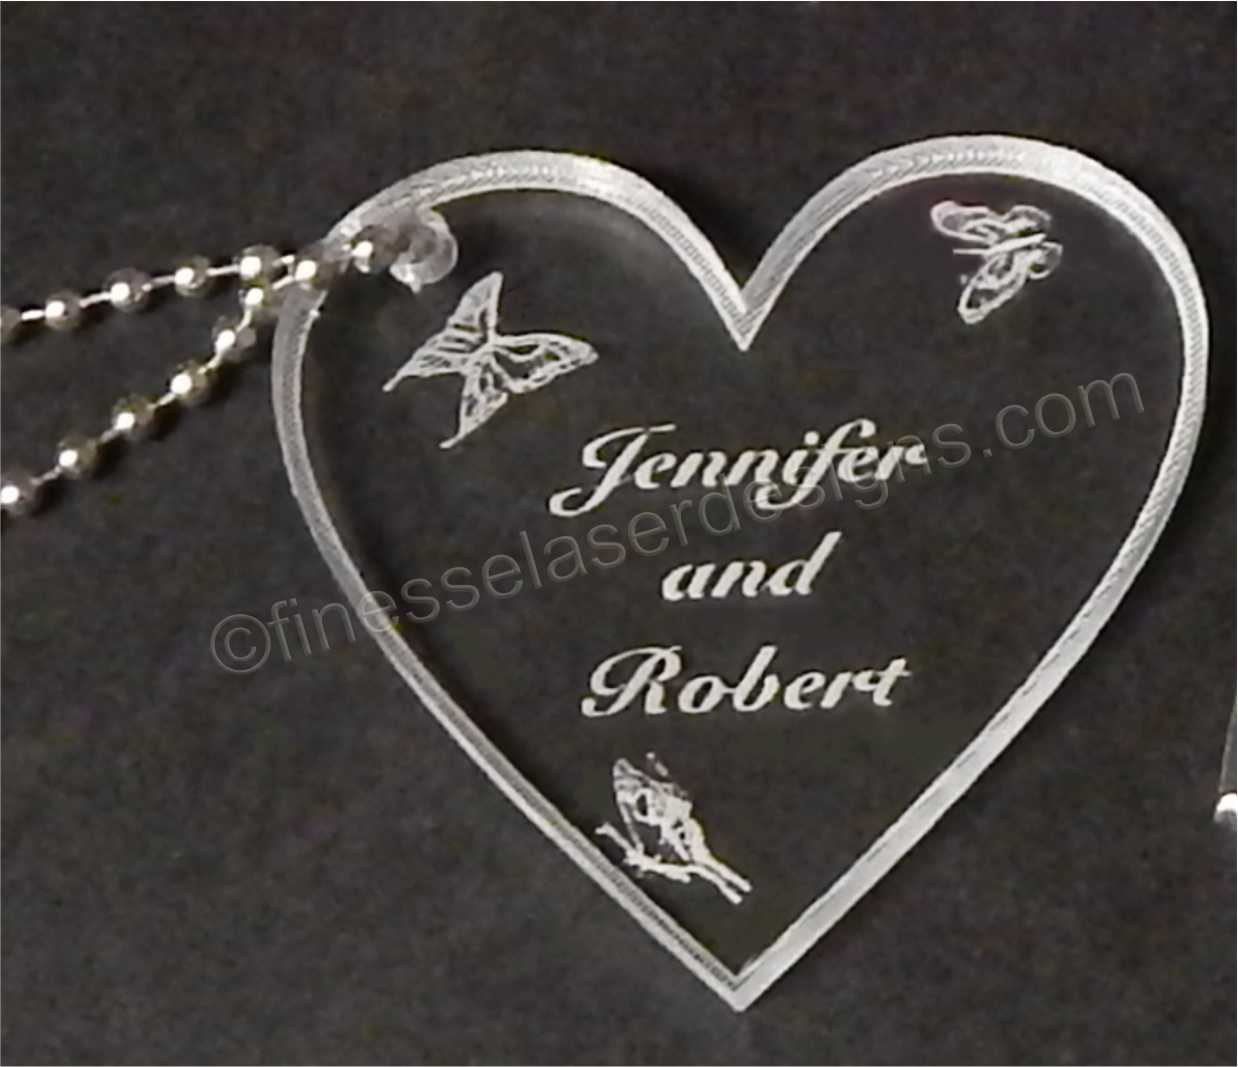 acrylic heart shaped keychain with butterflied and names engraved along with small metal chain attached